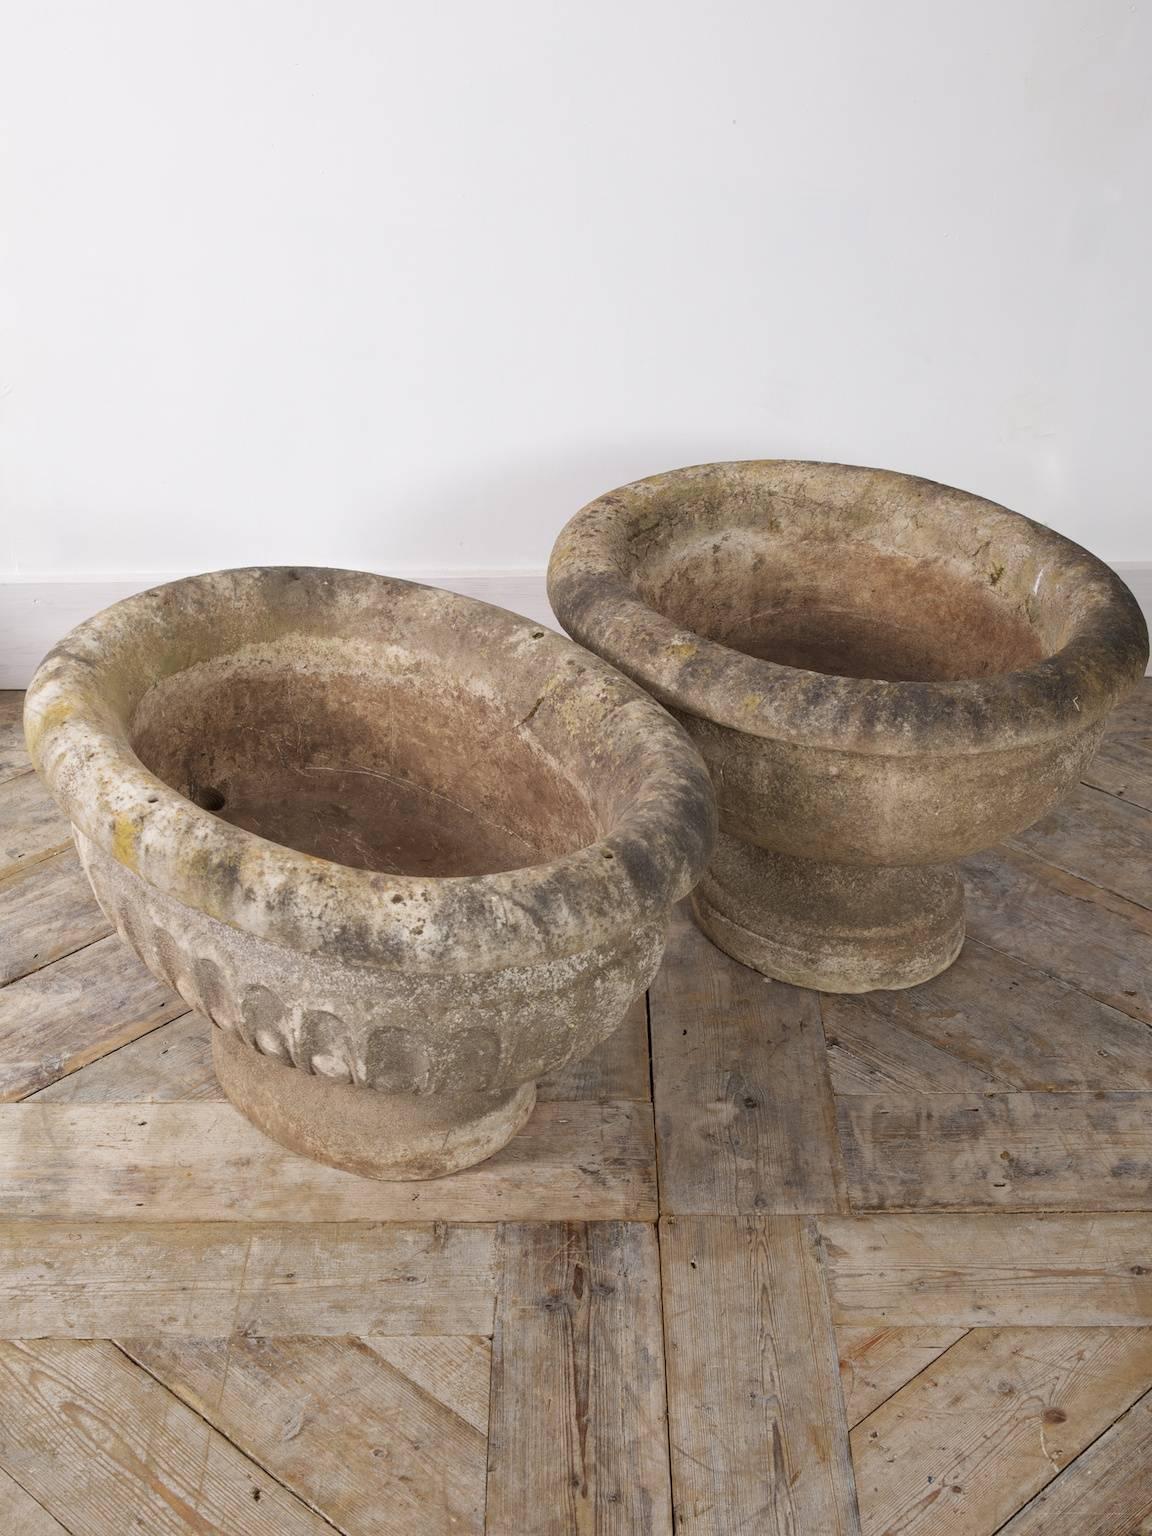 Two Carrara marble 17th-18th century cisterns.

The fluted and gadrooned shaped body set on an oval foot is £5800.00

The smooth example is £4200.00 

Fluted is 40cm or 15